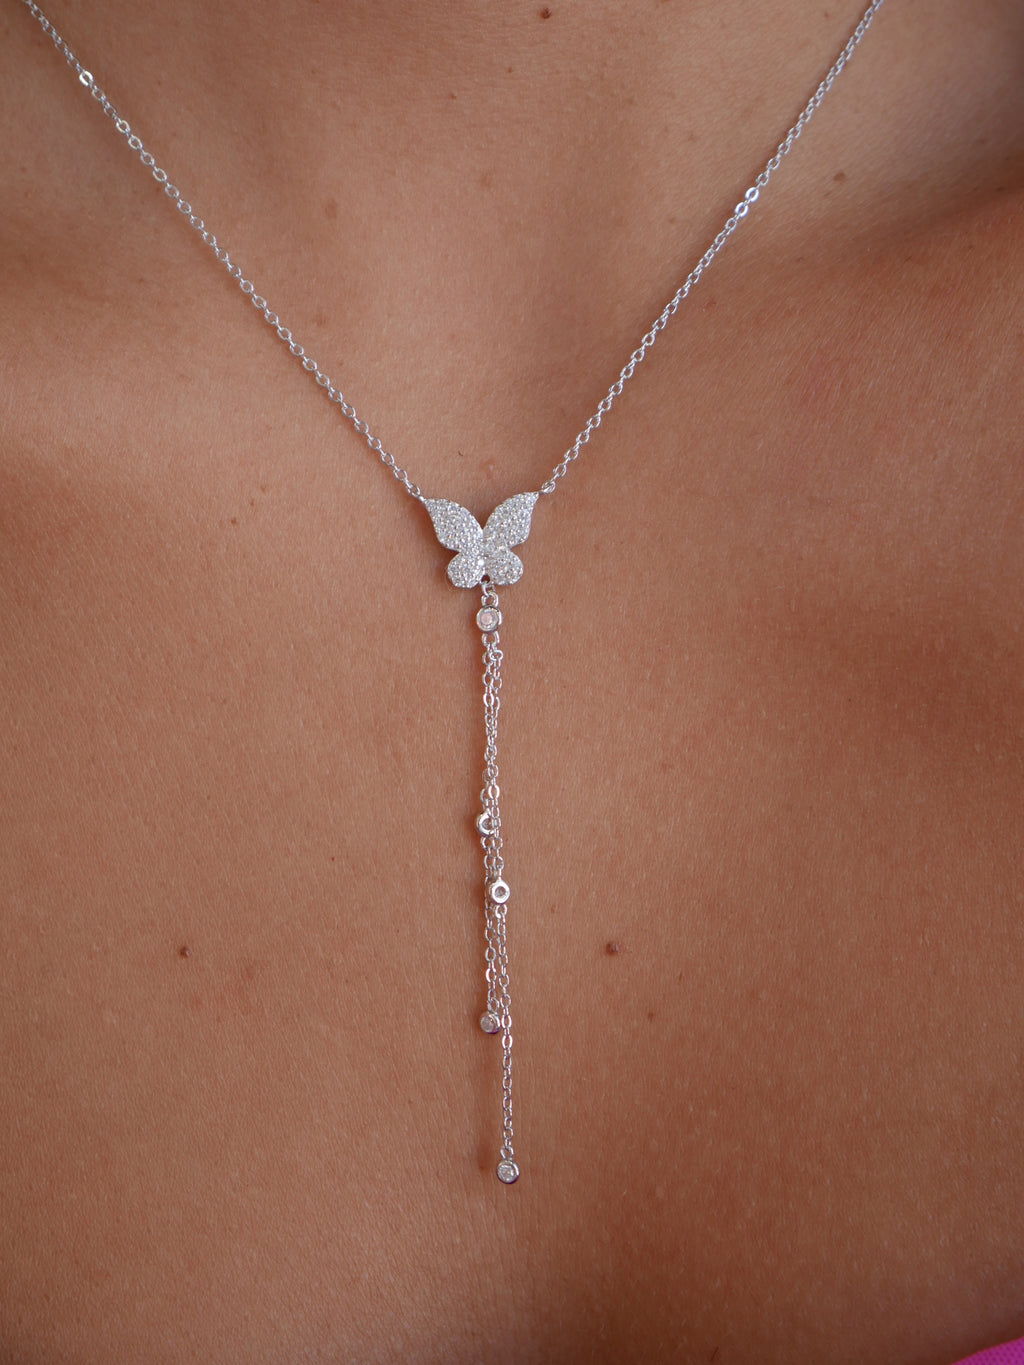 Butterfly silver Y-necklace with clear cubic zirconia and sliding